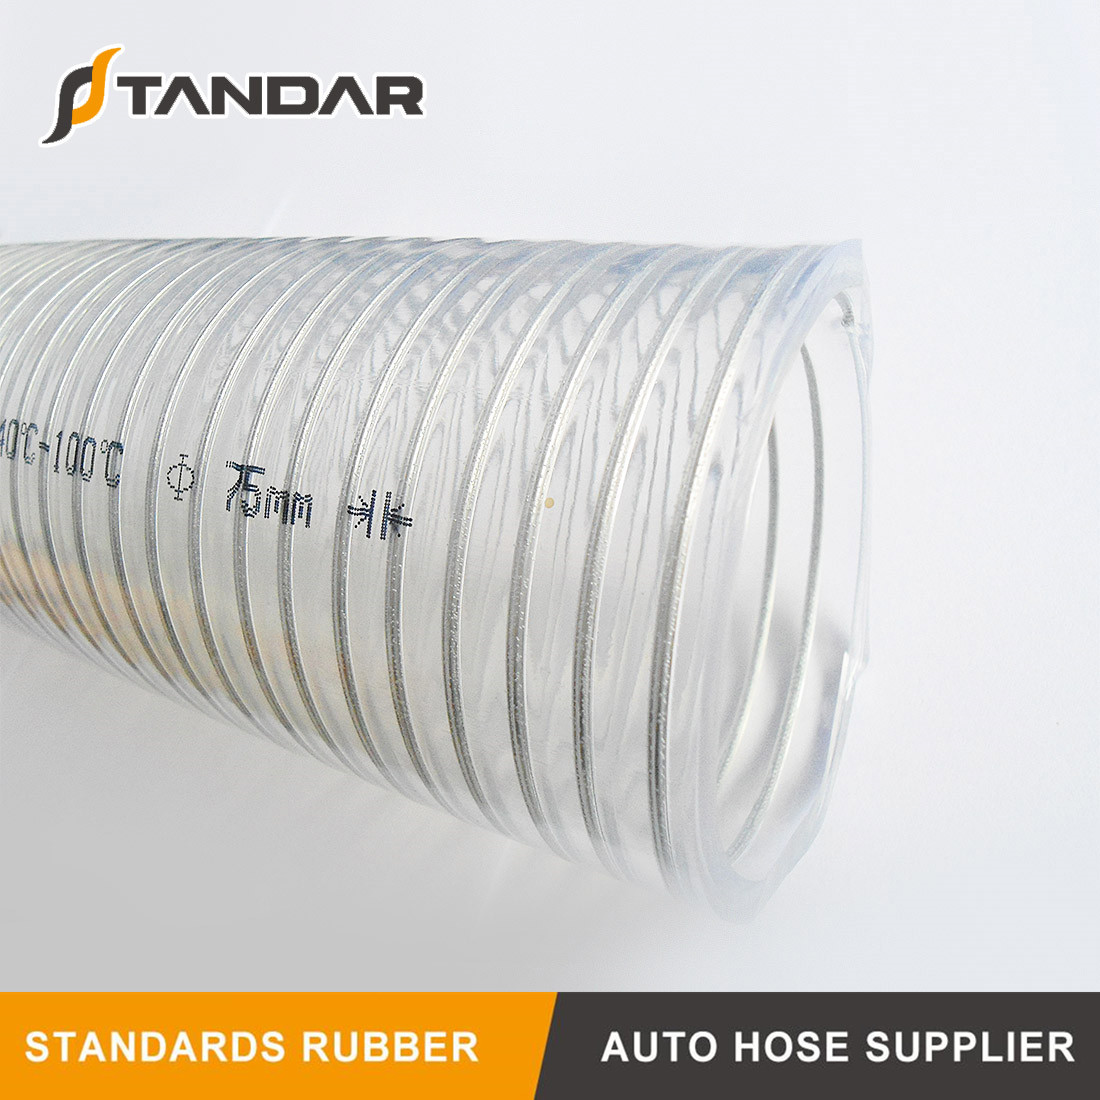 What is conductive silicone hose and flame retardant silicone hose?